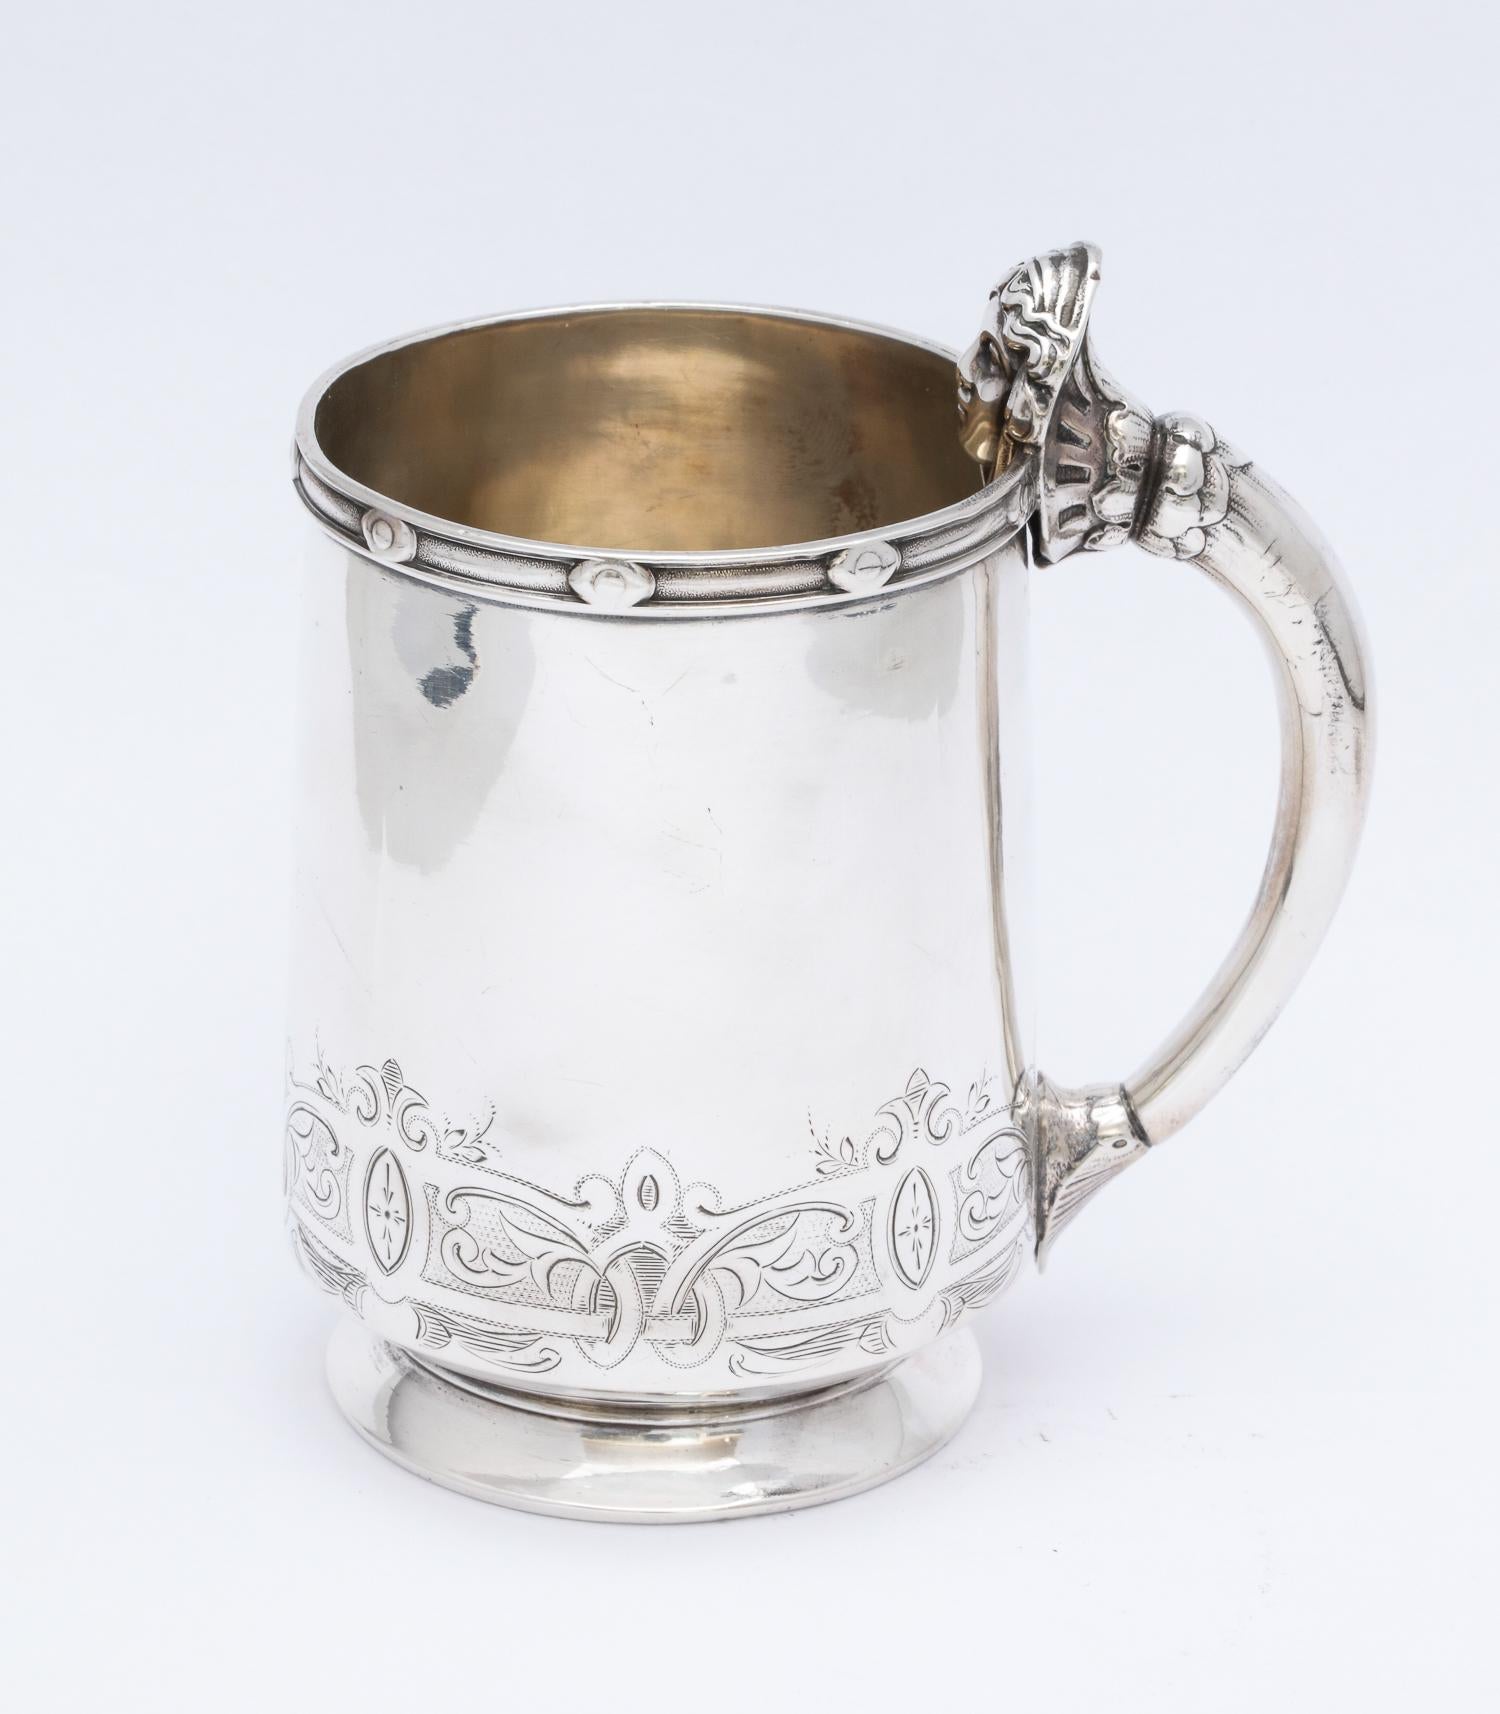 Neoclassical, sterling silver child's mug/cup, Gorham Mfg. Co, Providence, Rhode Island, circa 1860. Handle is decorated with a neoclassical woman's head. Interior is lightly gilded. Decorative border along top edge; etched work along bottom of cup.